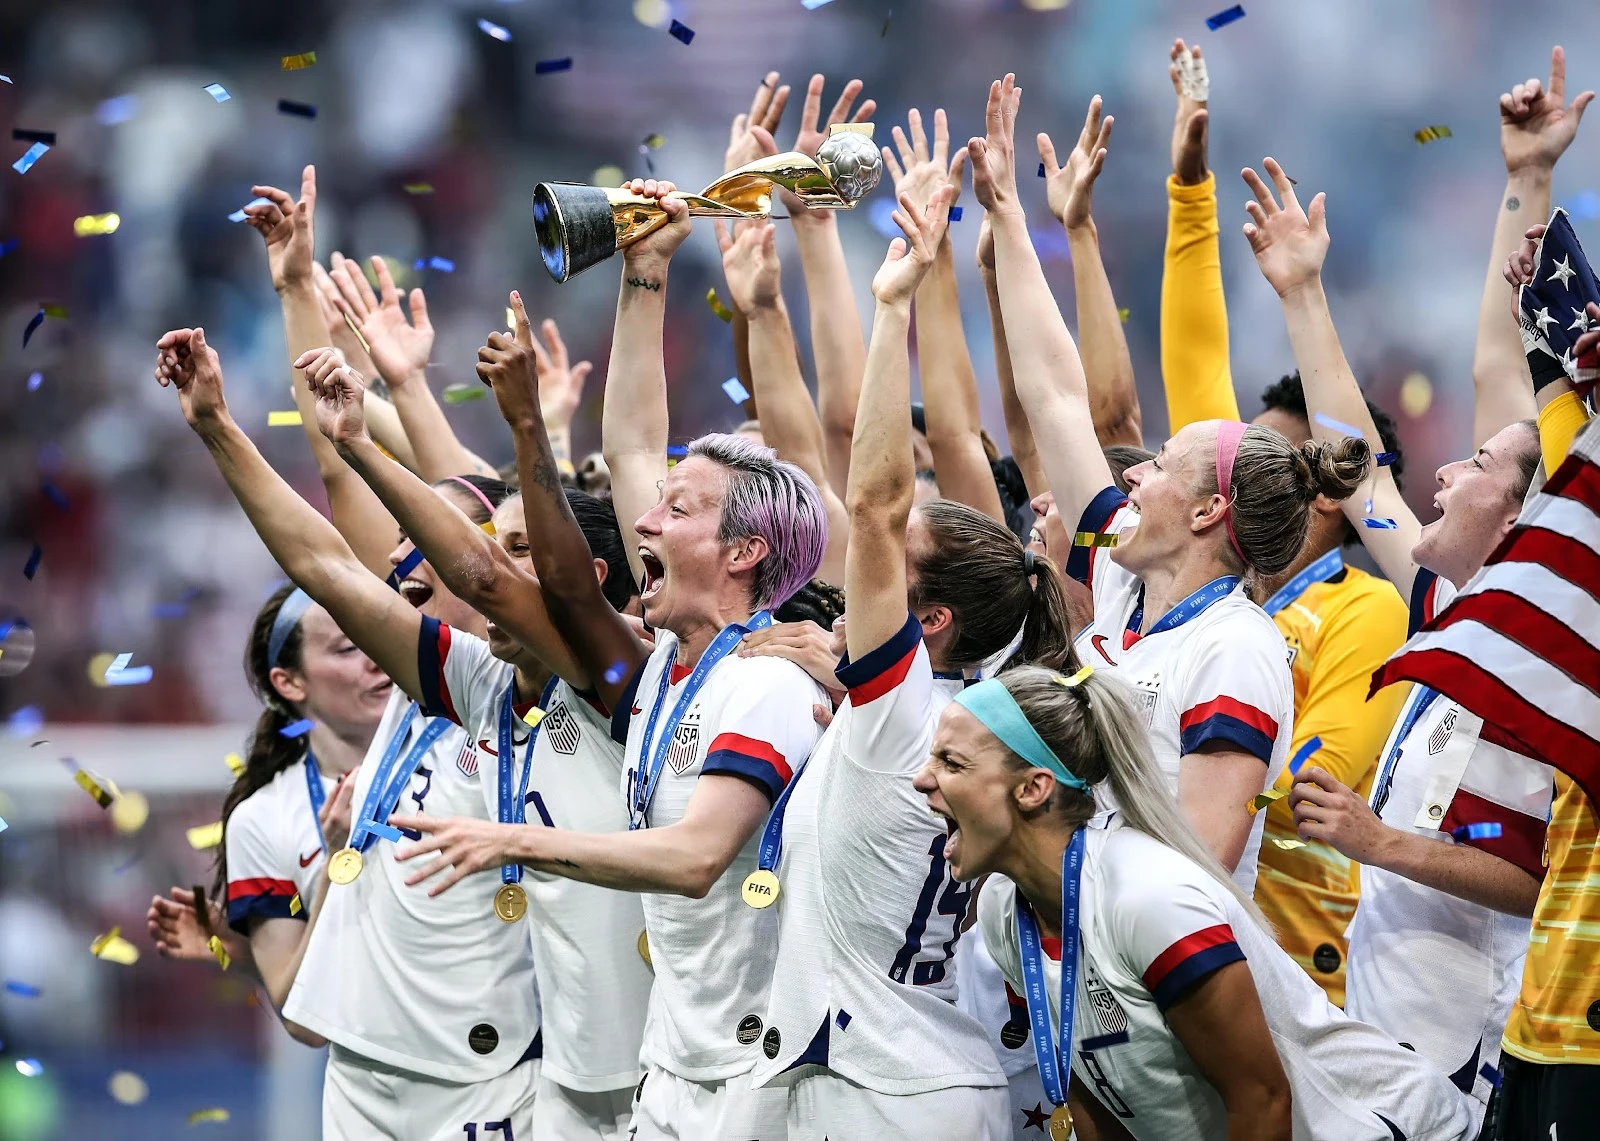 The U.S.A. women's team celebrates winning the World Cup in 2019.